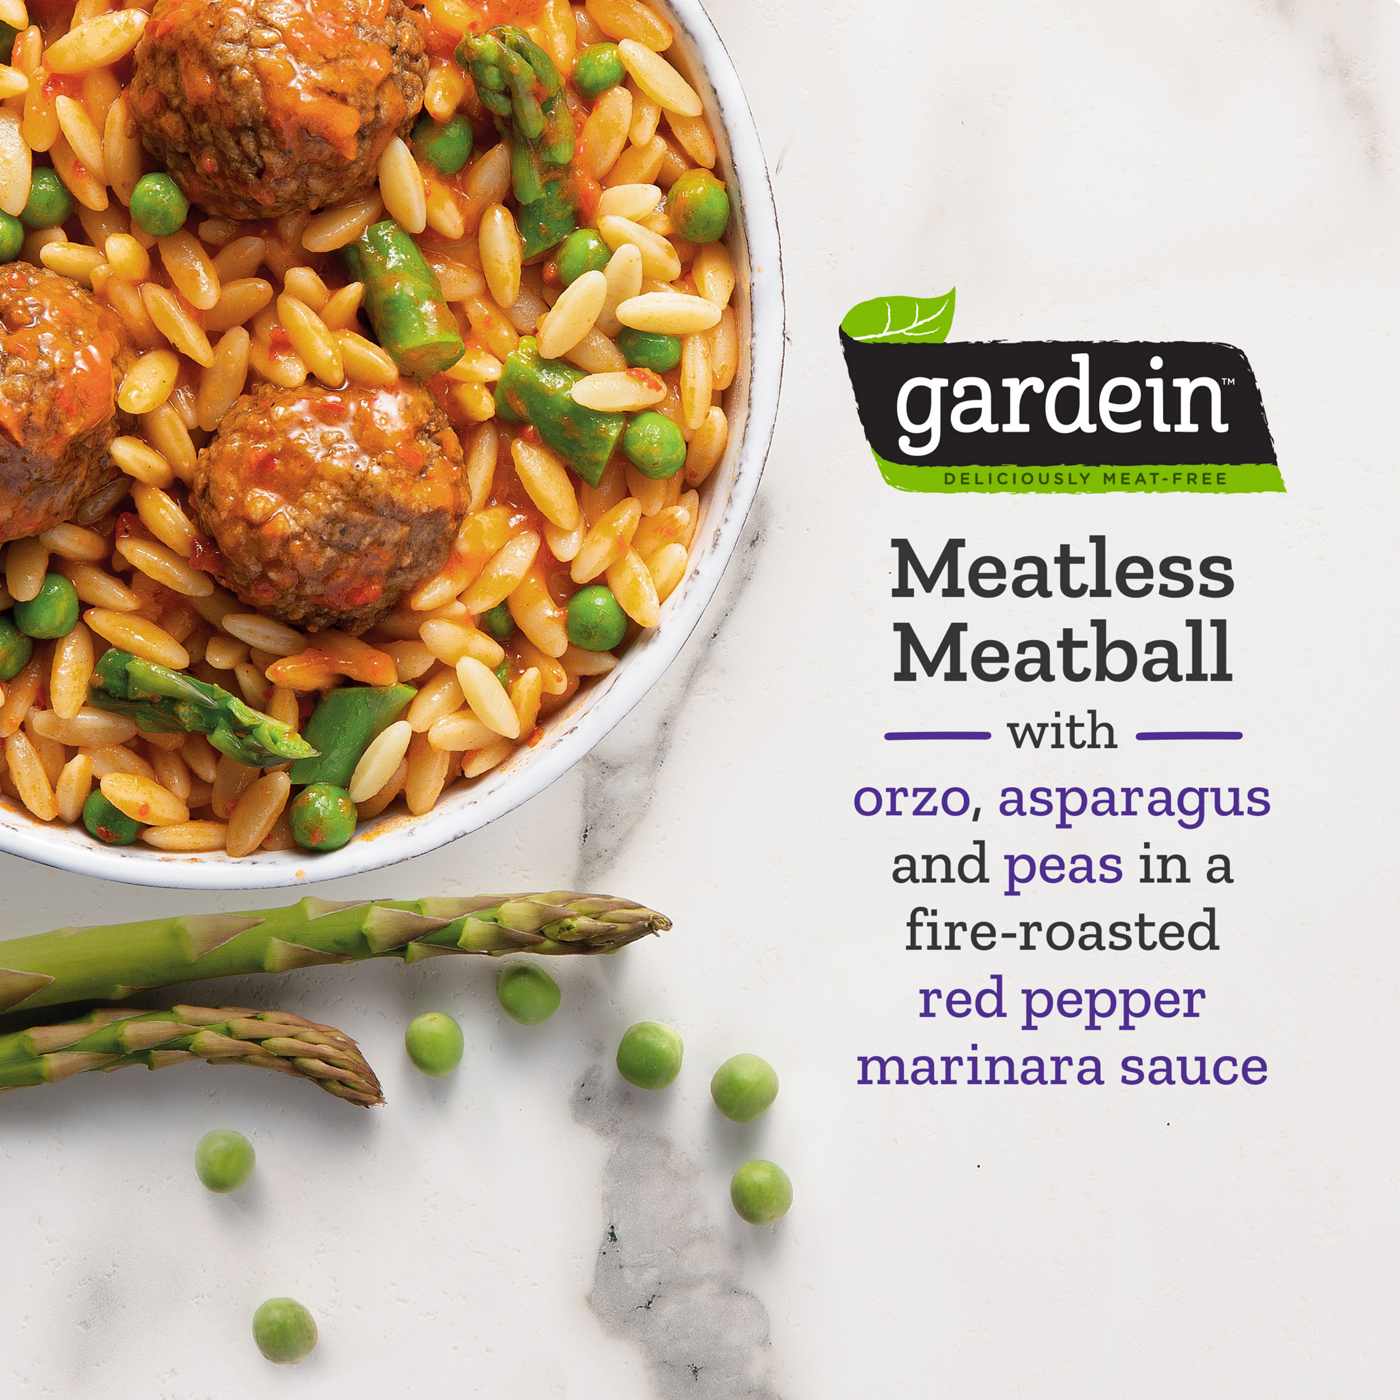 Purple Carrot Plant-Based 22g Protein Meatball Marinara Frozen Meal; image 6 of 6